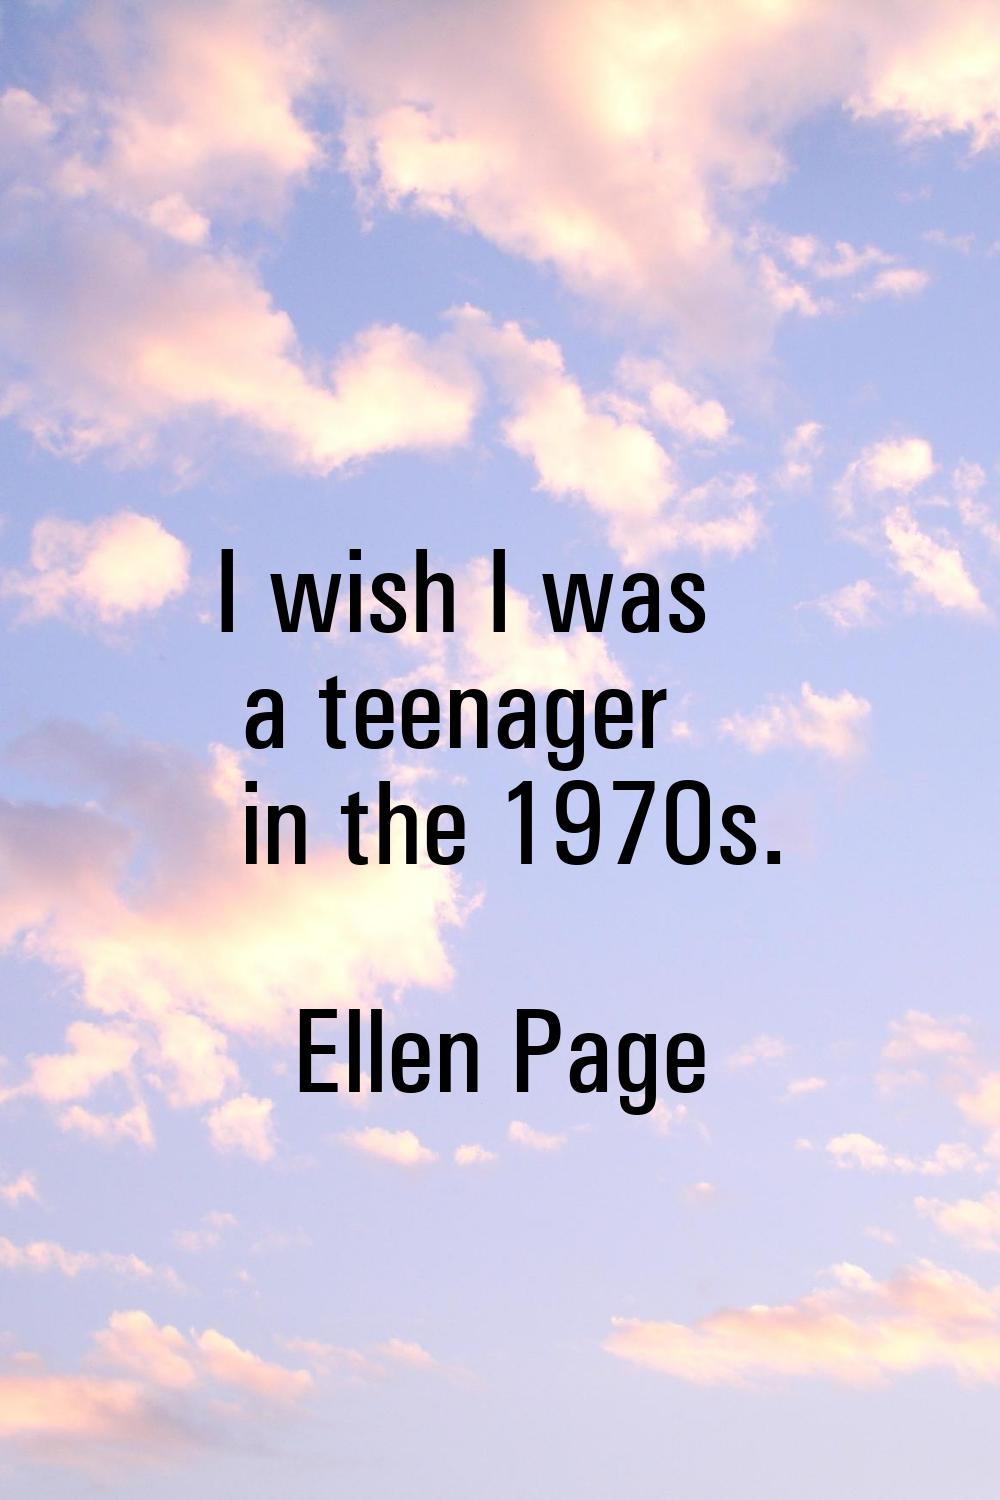 I wish I was a teenager in the 1970s.